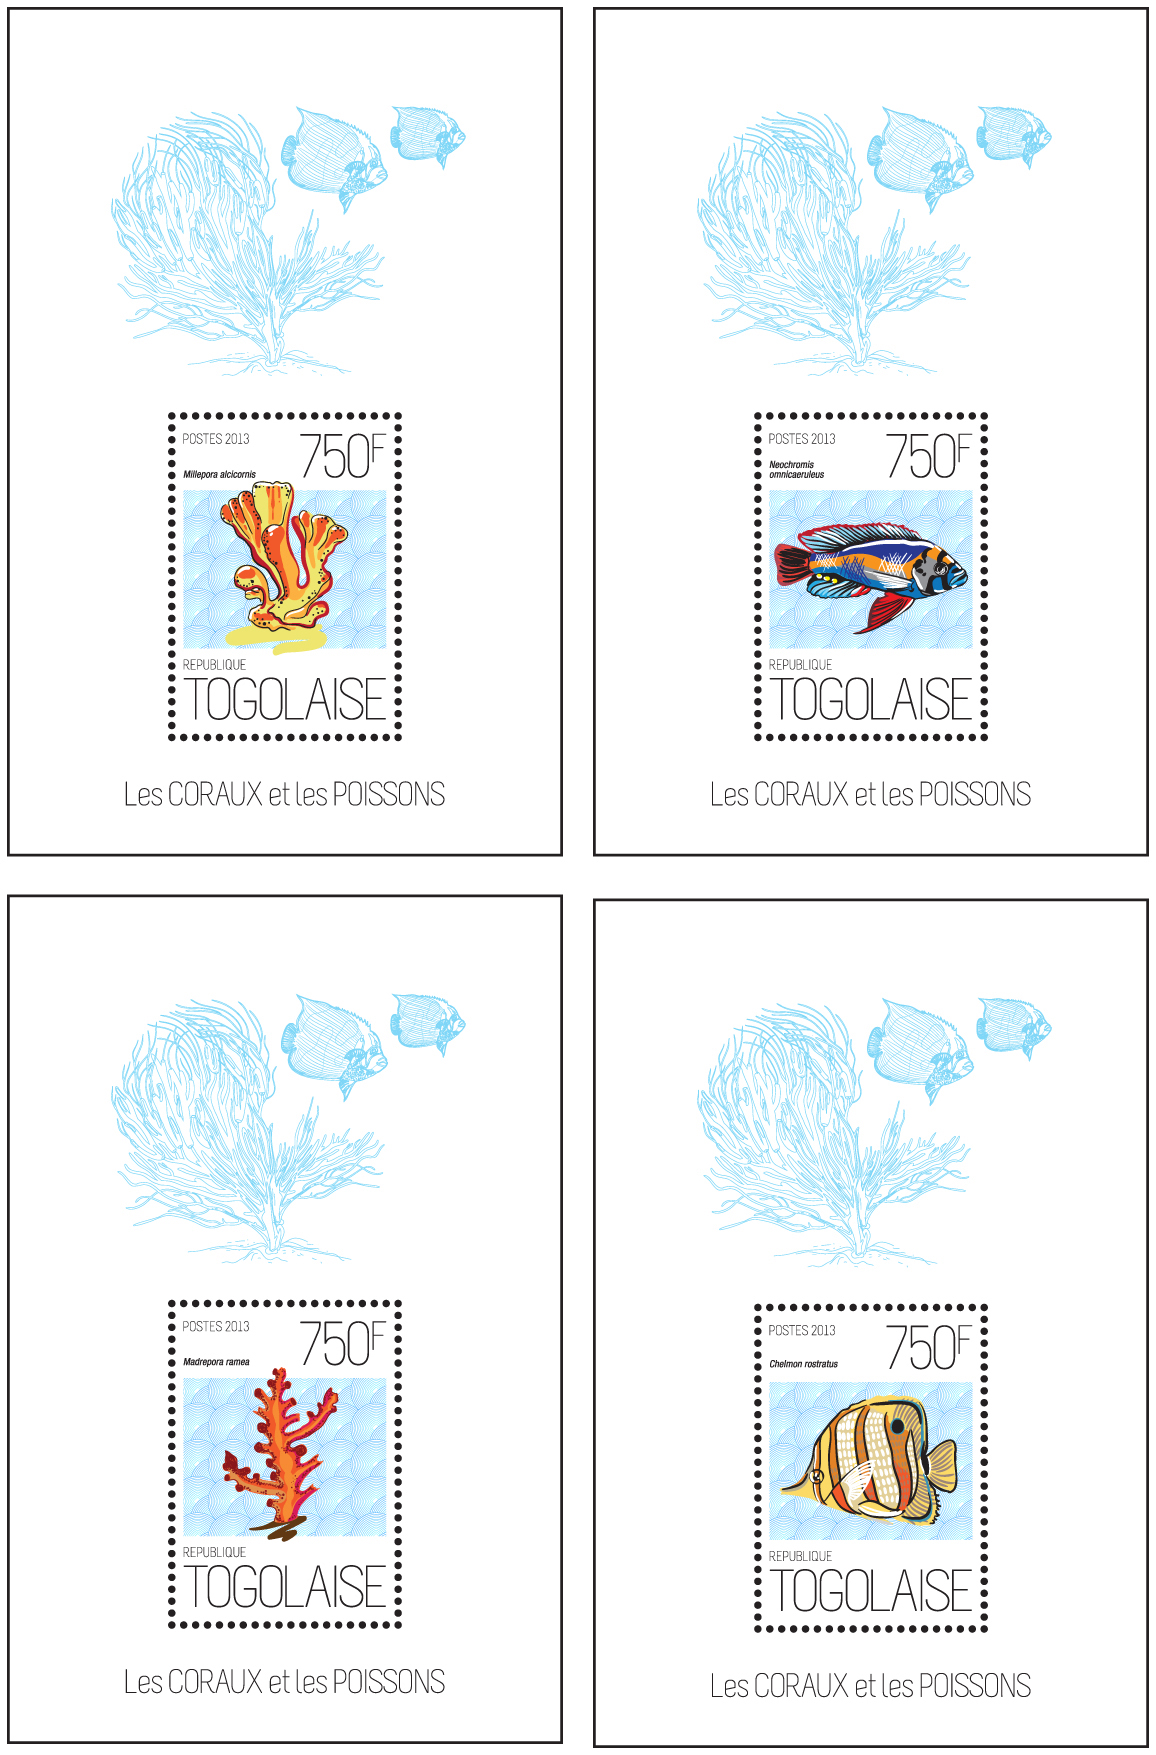 Coral and fish - Issue of Togo postage stamps